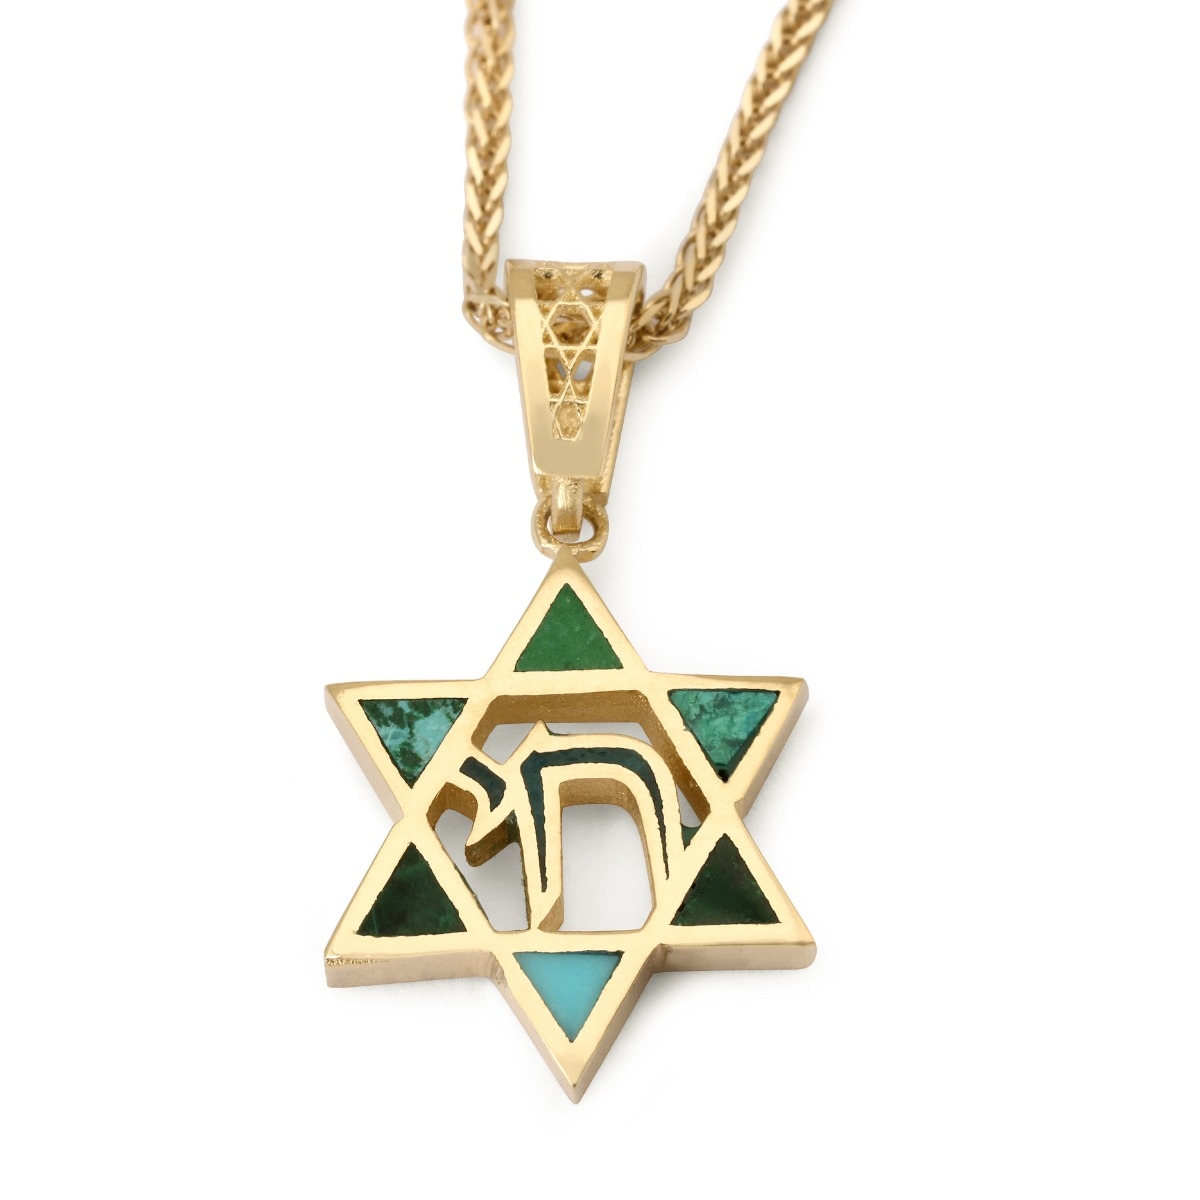 Dainty 14K Yellow Gold Star of David Pendant with Chai and Eilat Stone - 1